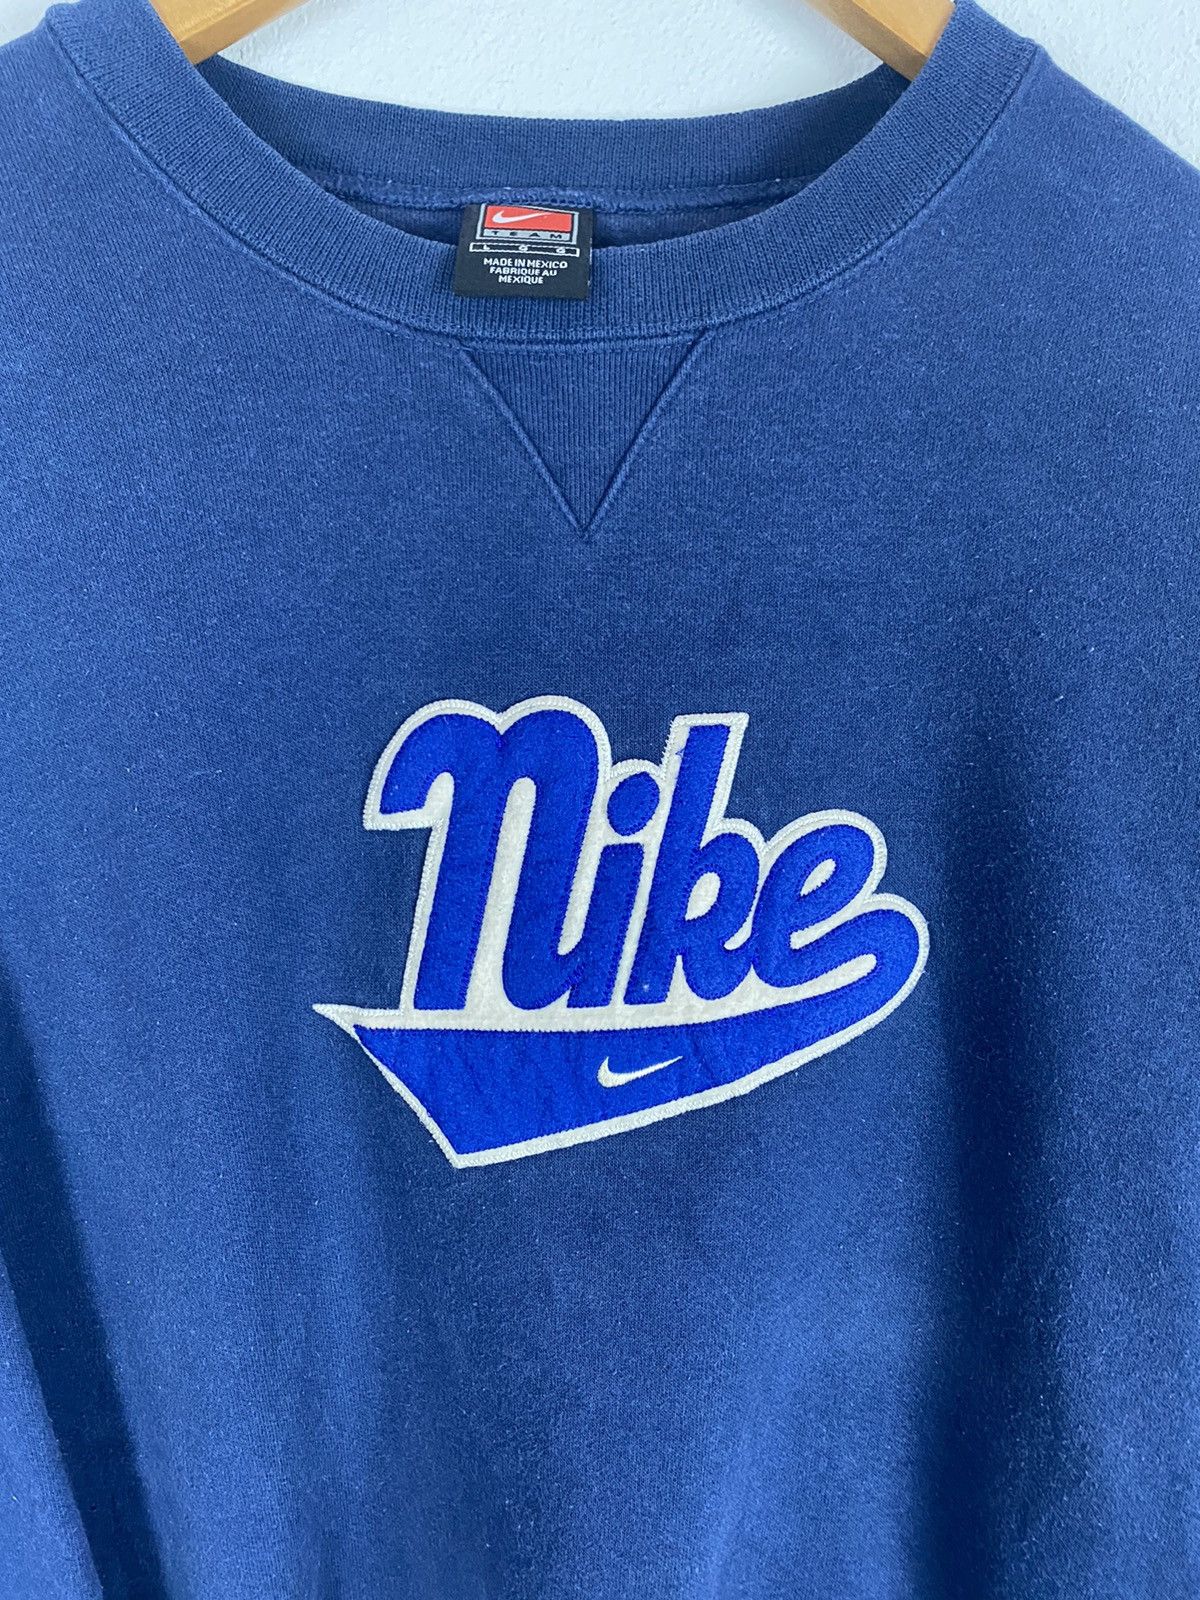 Nike Vintage Nike Spell Out Sweatshirt Size US L / EU 52-54 / 3 - 5 Preview